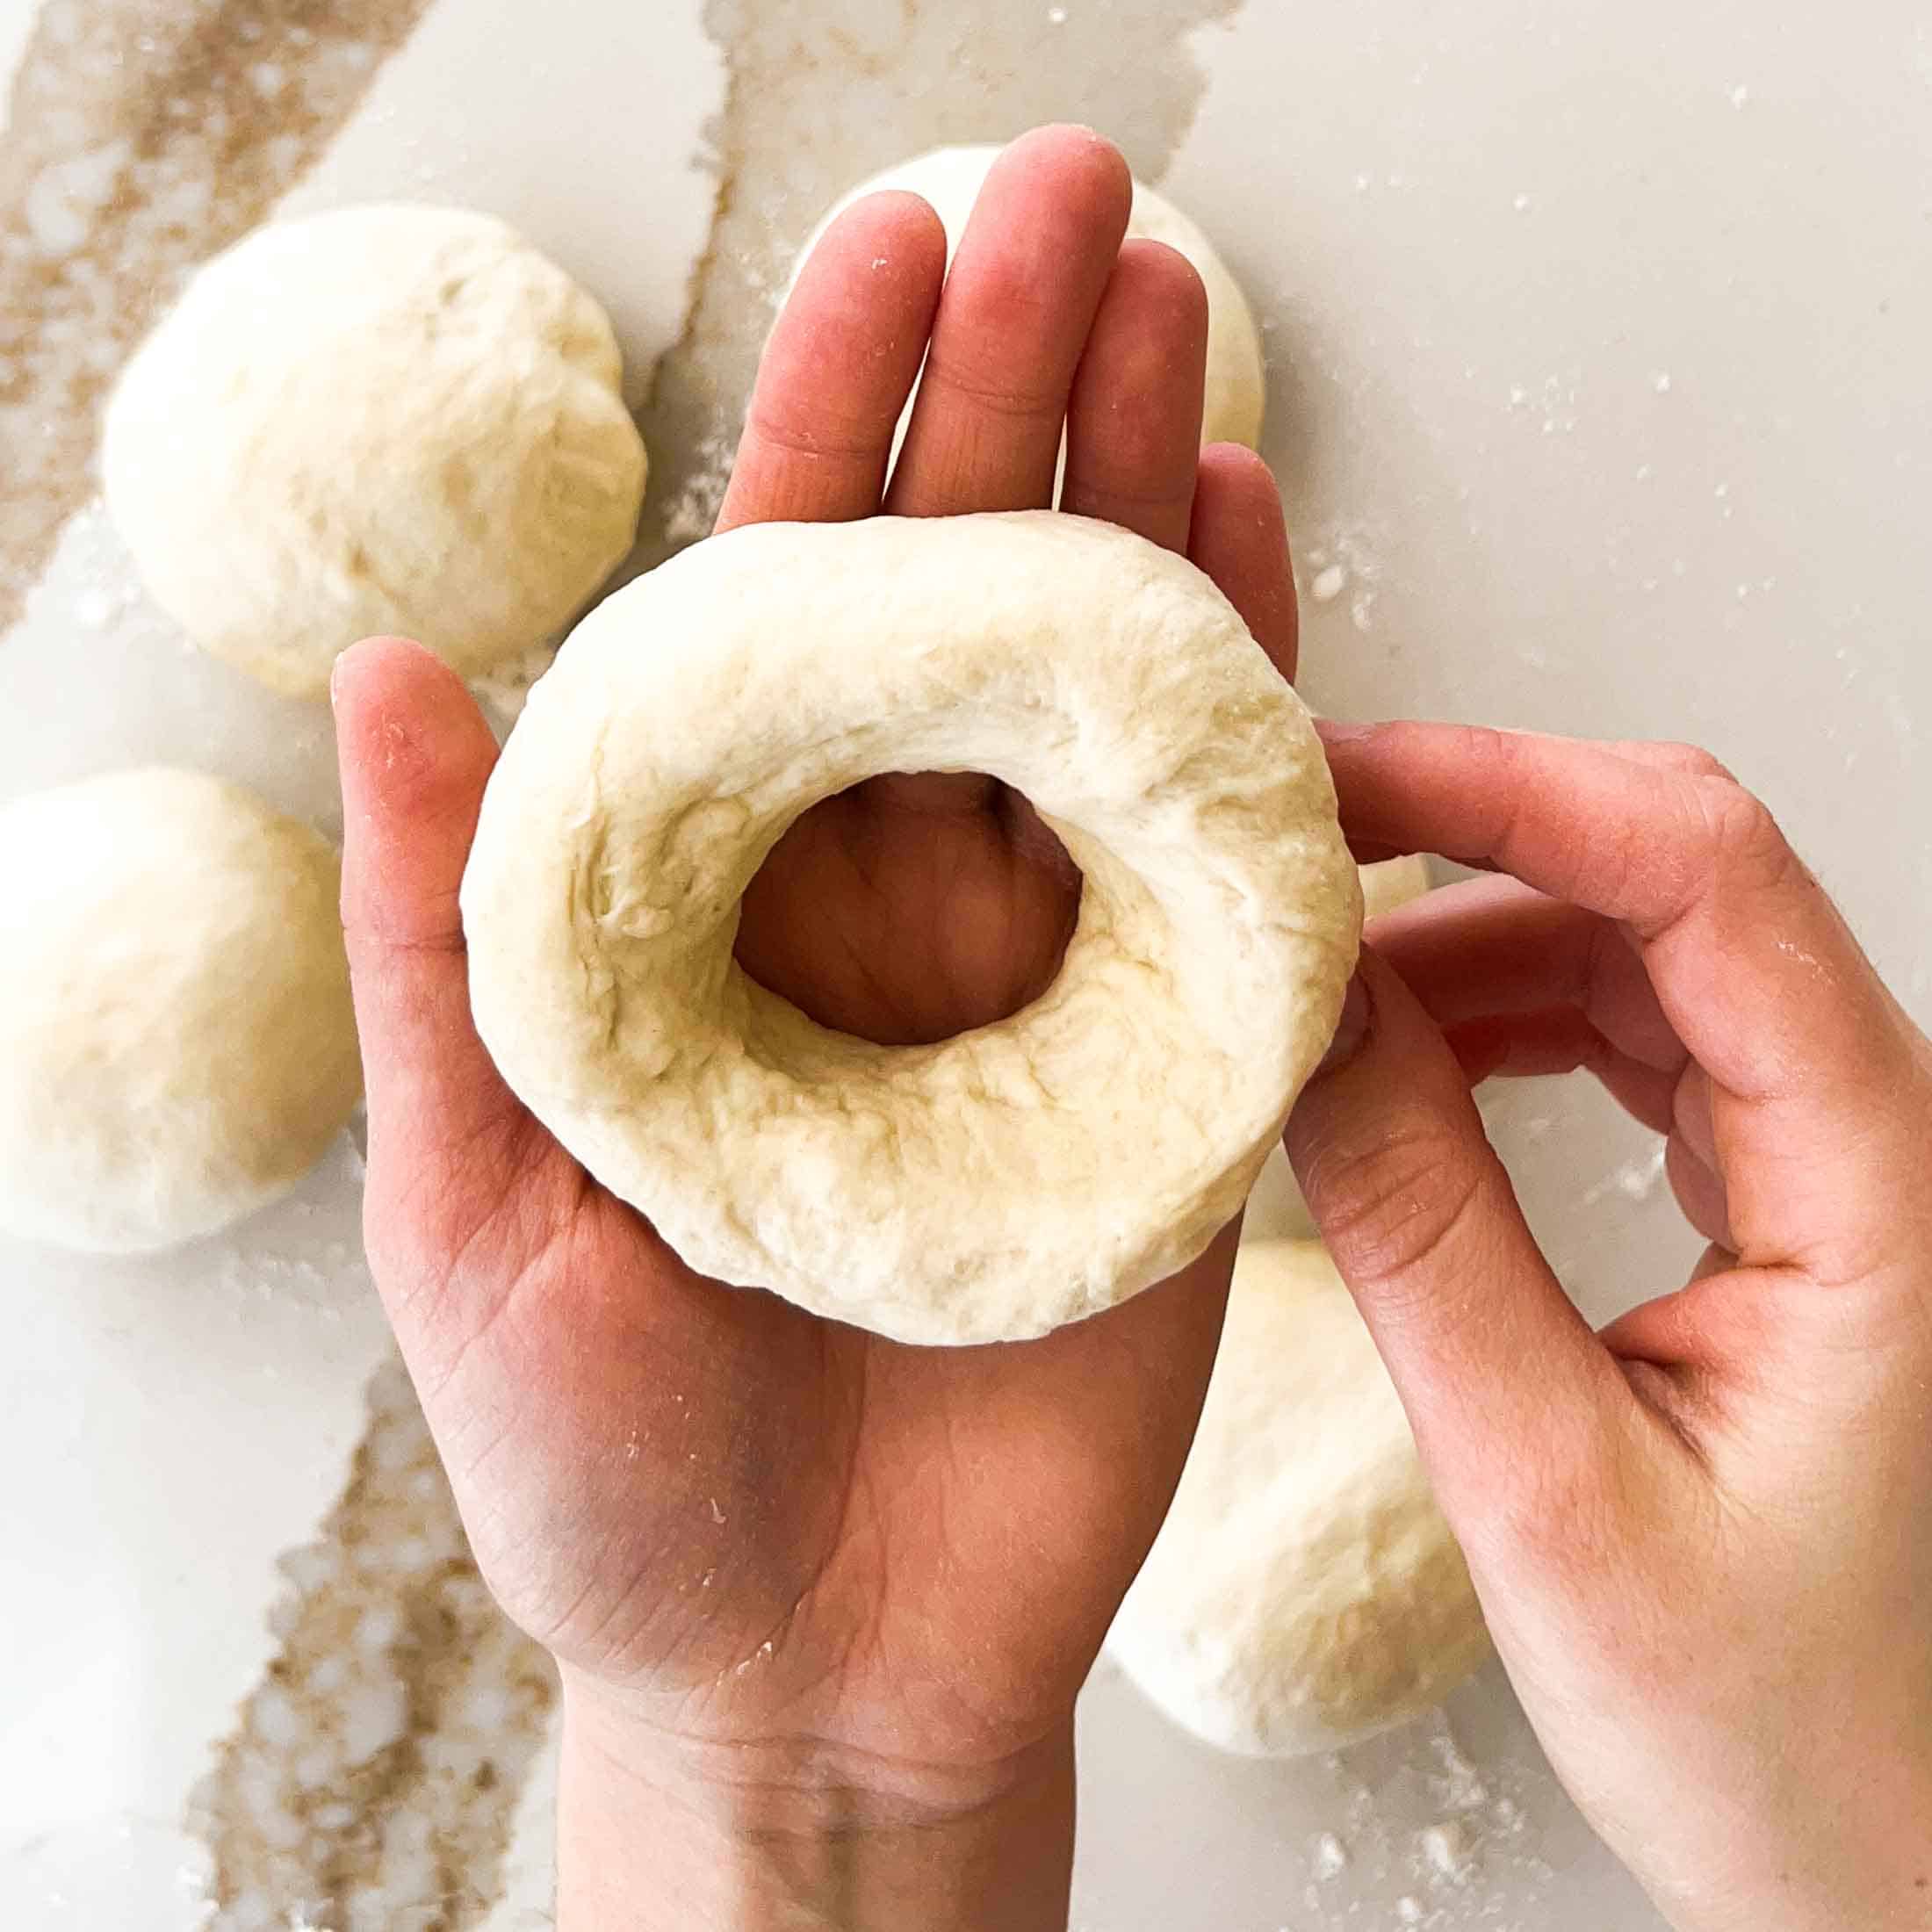 Fully formed raw bagel in the palm of a hand.